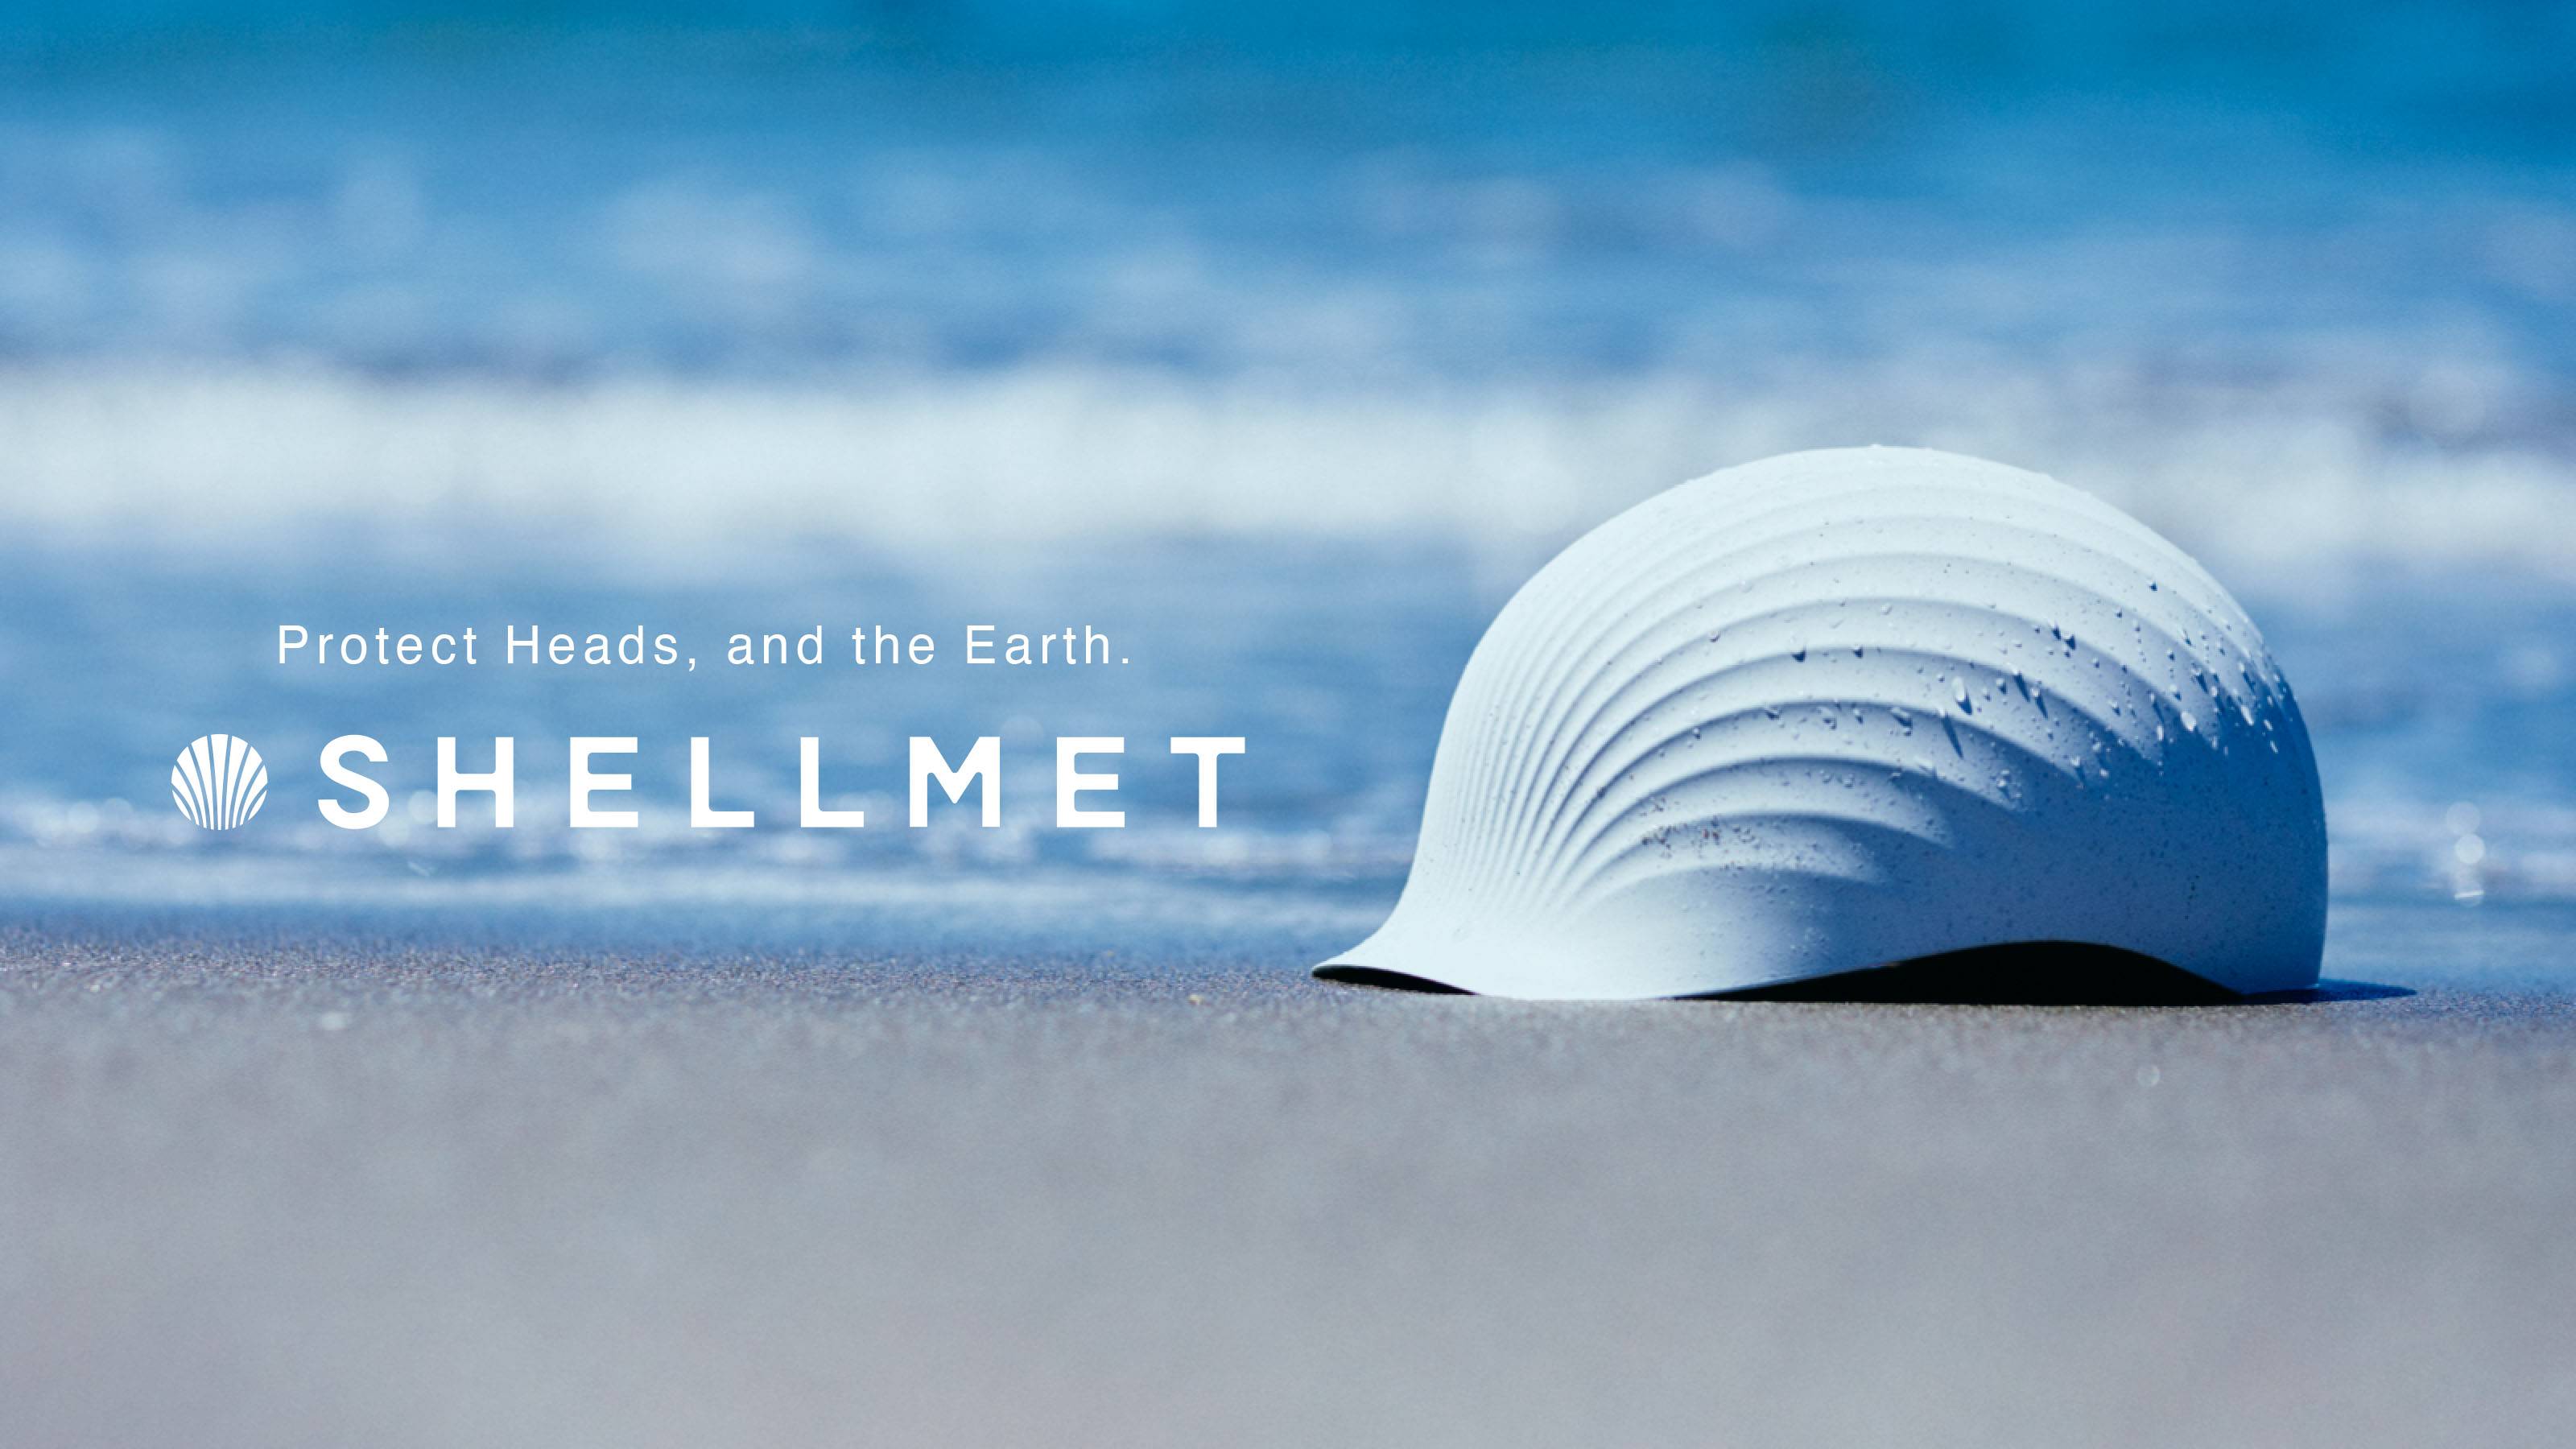 Image of a shell in the form of a helmet on the beach with waves in the background. To the left of the helmet in white copy reads 